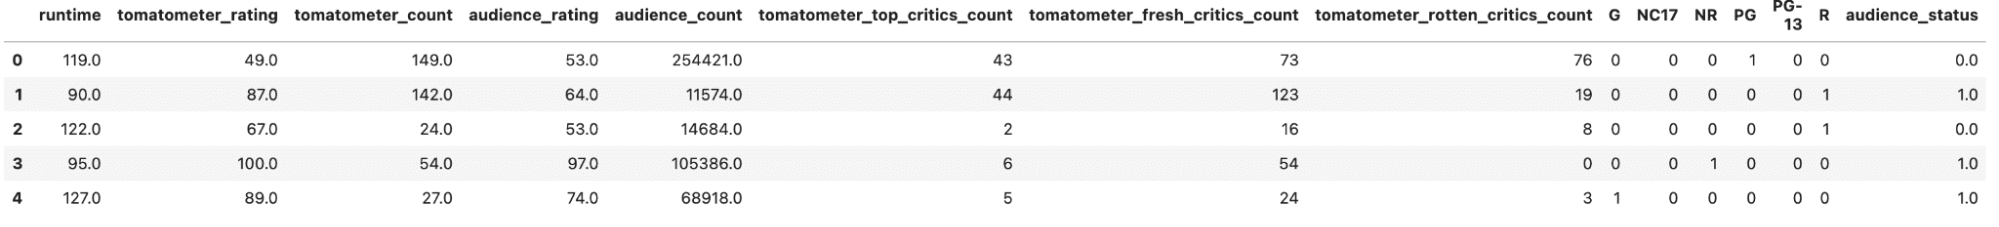 Data Science Project of Rotten Tomatoes Movie Rating Prediction: First Approach